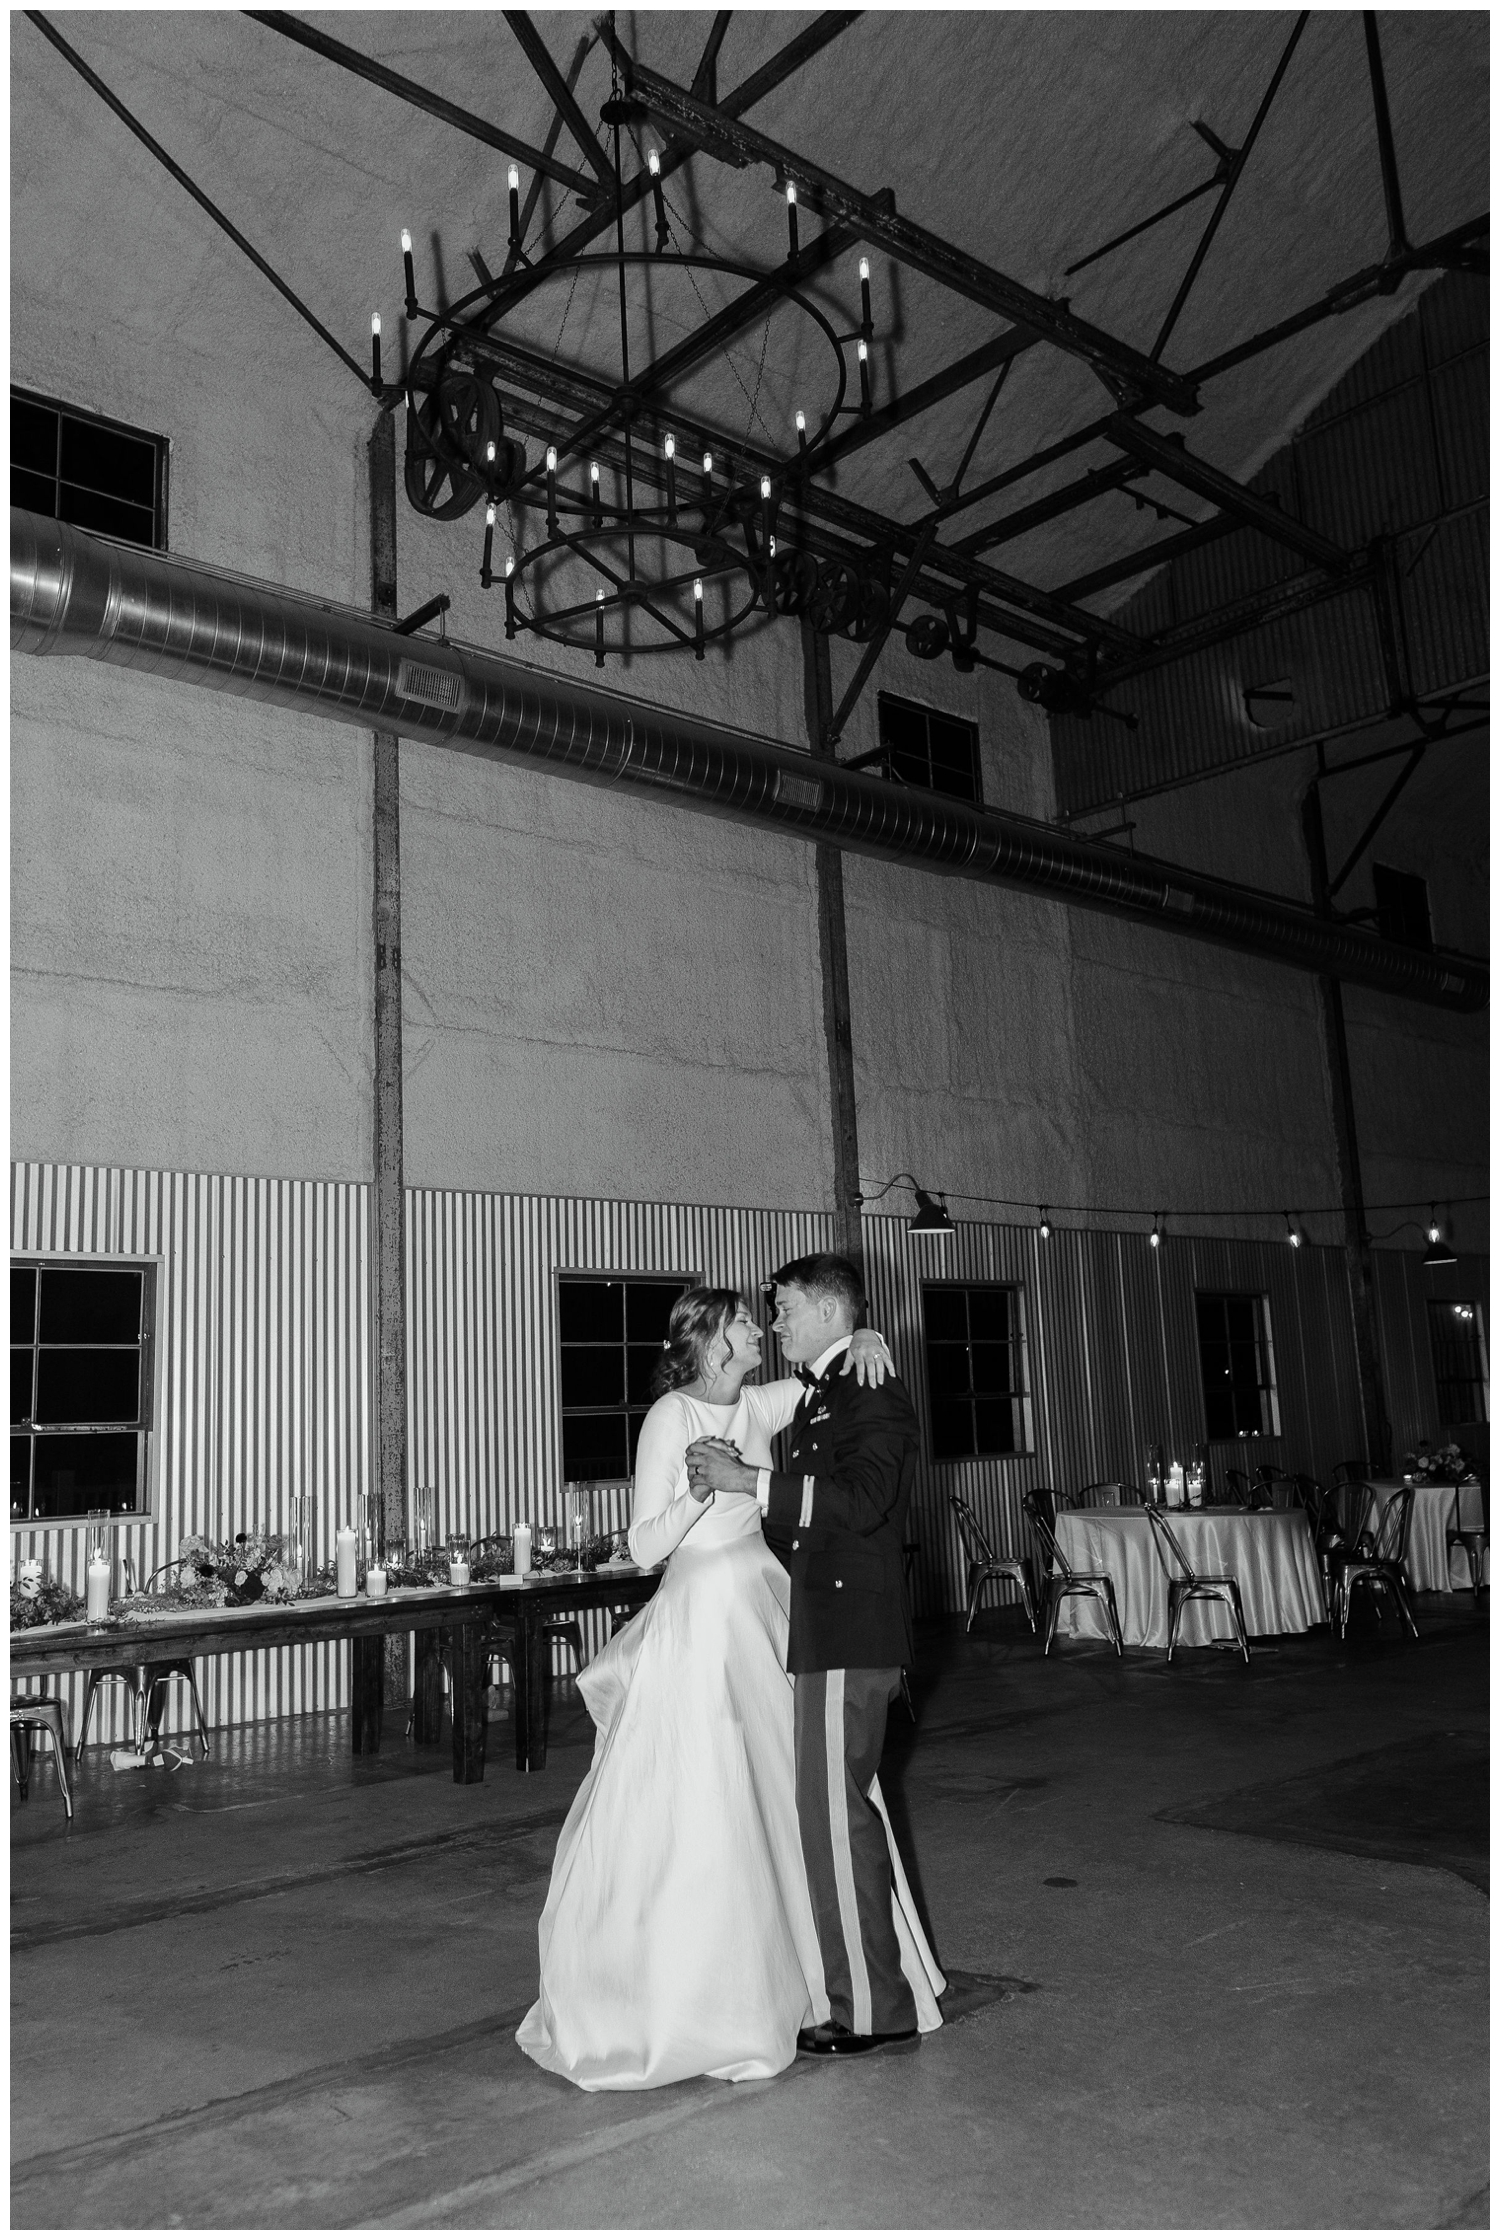 black and white image of private last dance bride and groom